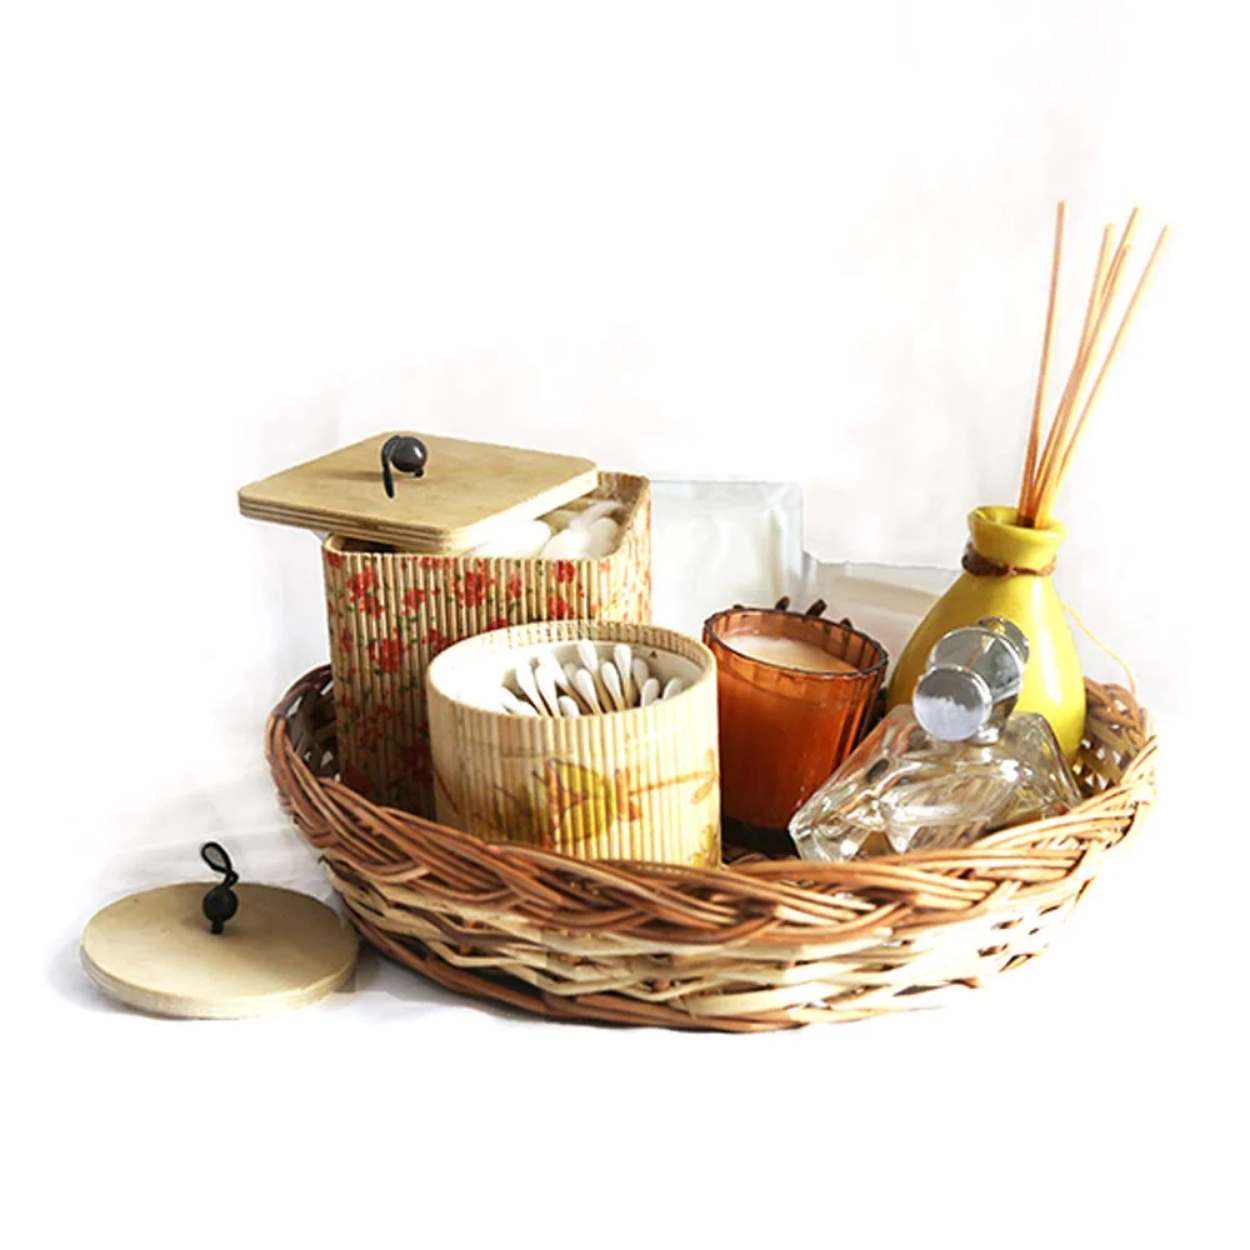 DaisyLife simple round wicker basket for festive season, storing sweets